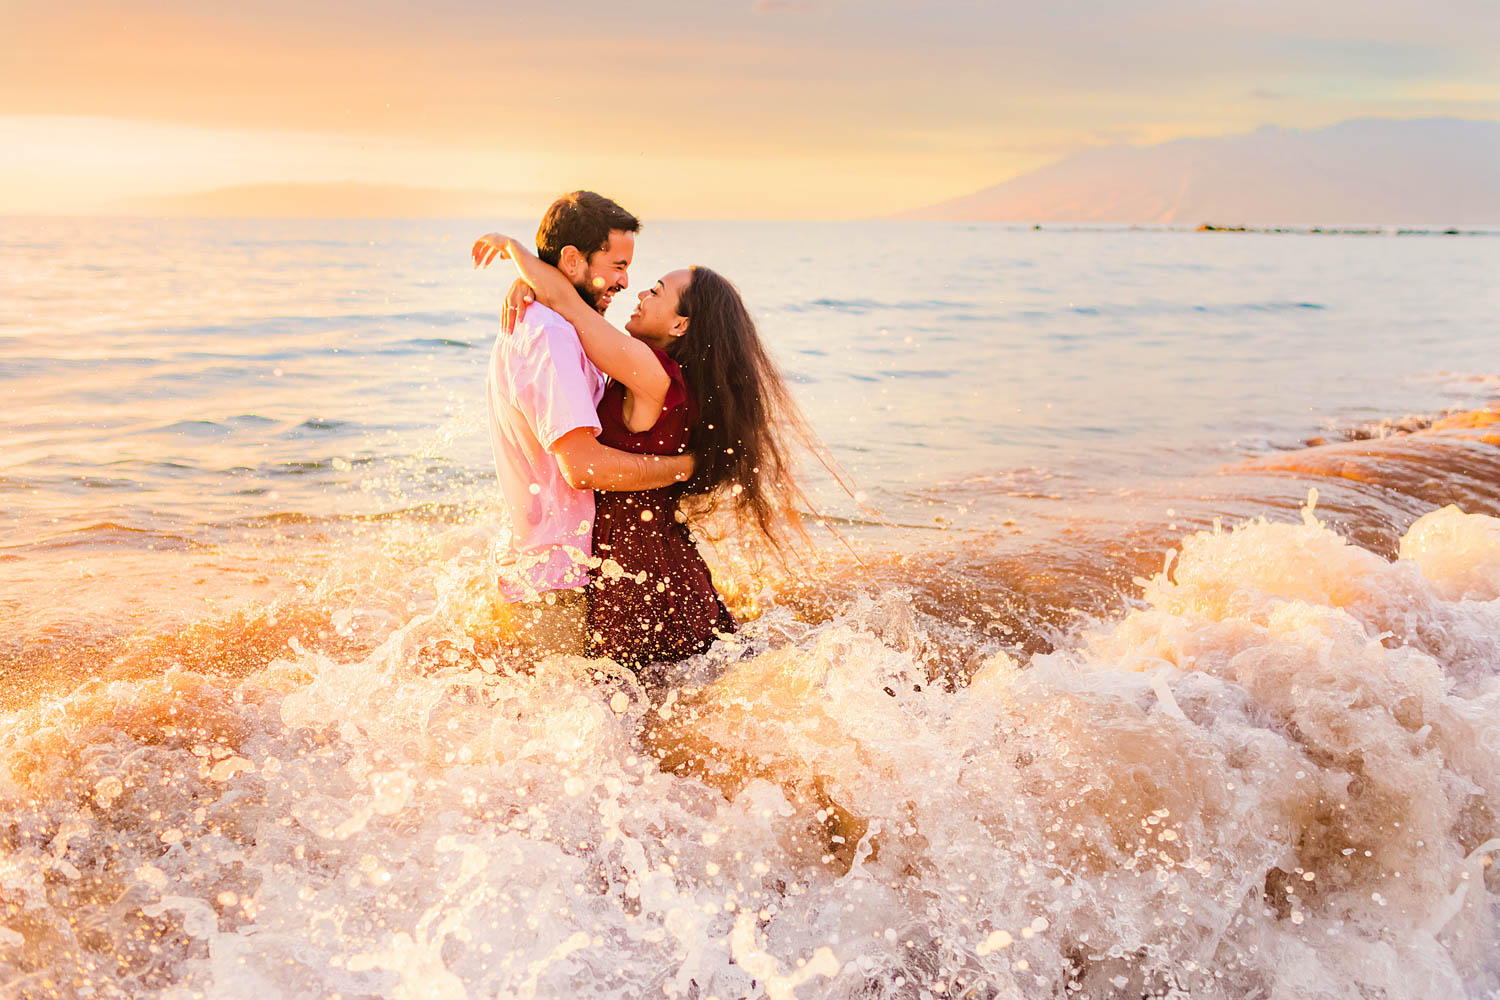 A couple embrace in the waves during a couples beach photoshoot in Hawaii while taking the eco-tourism vacation of a lifetime.